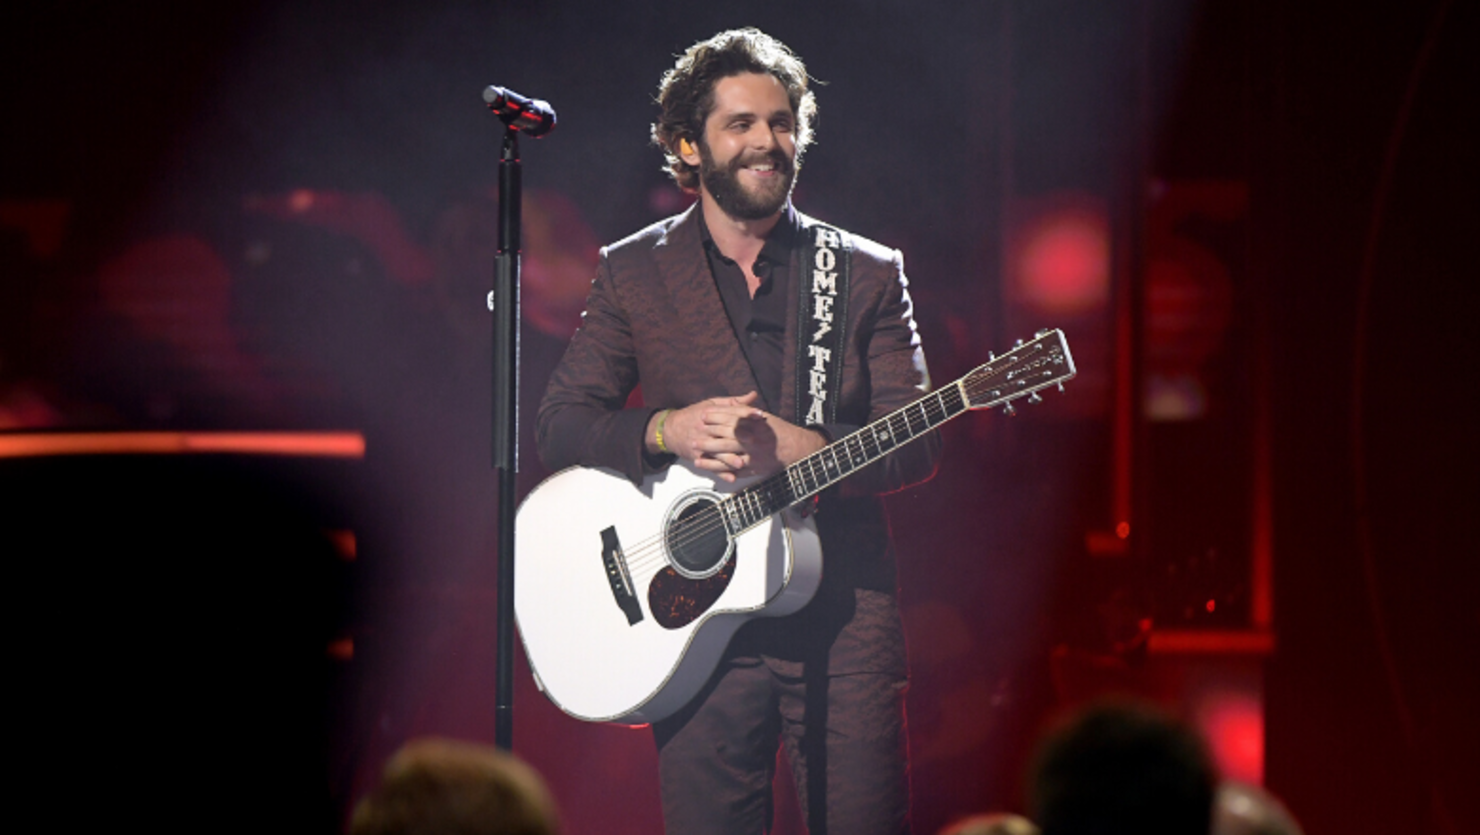 Thomas Rhett Hopes To 'Lead By Example' When It Comes To Being A Light